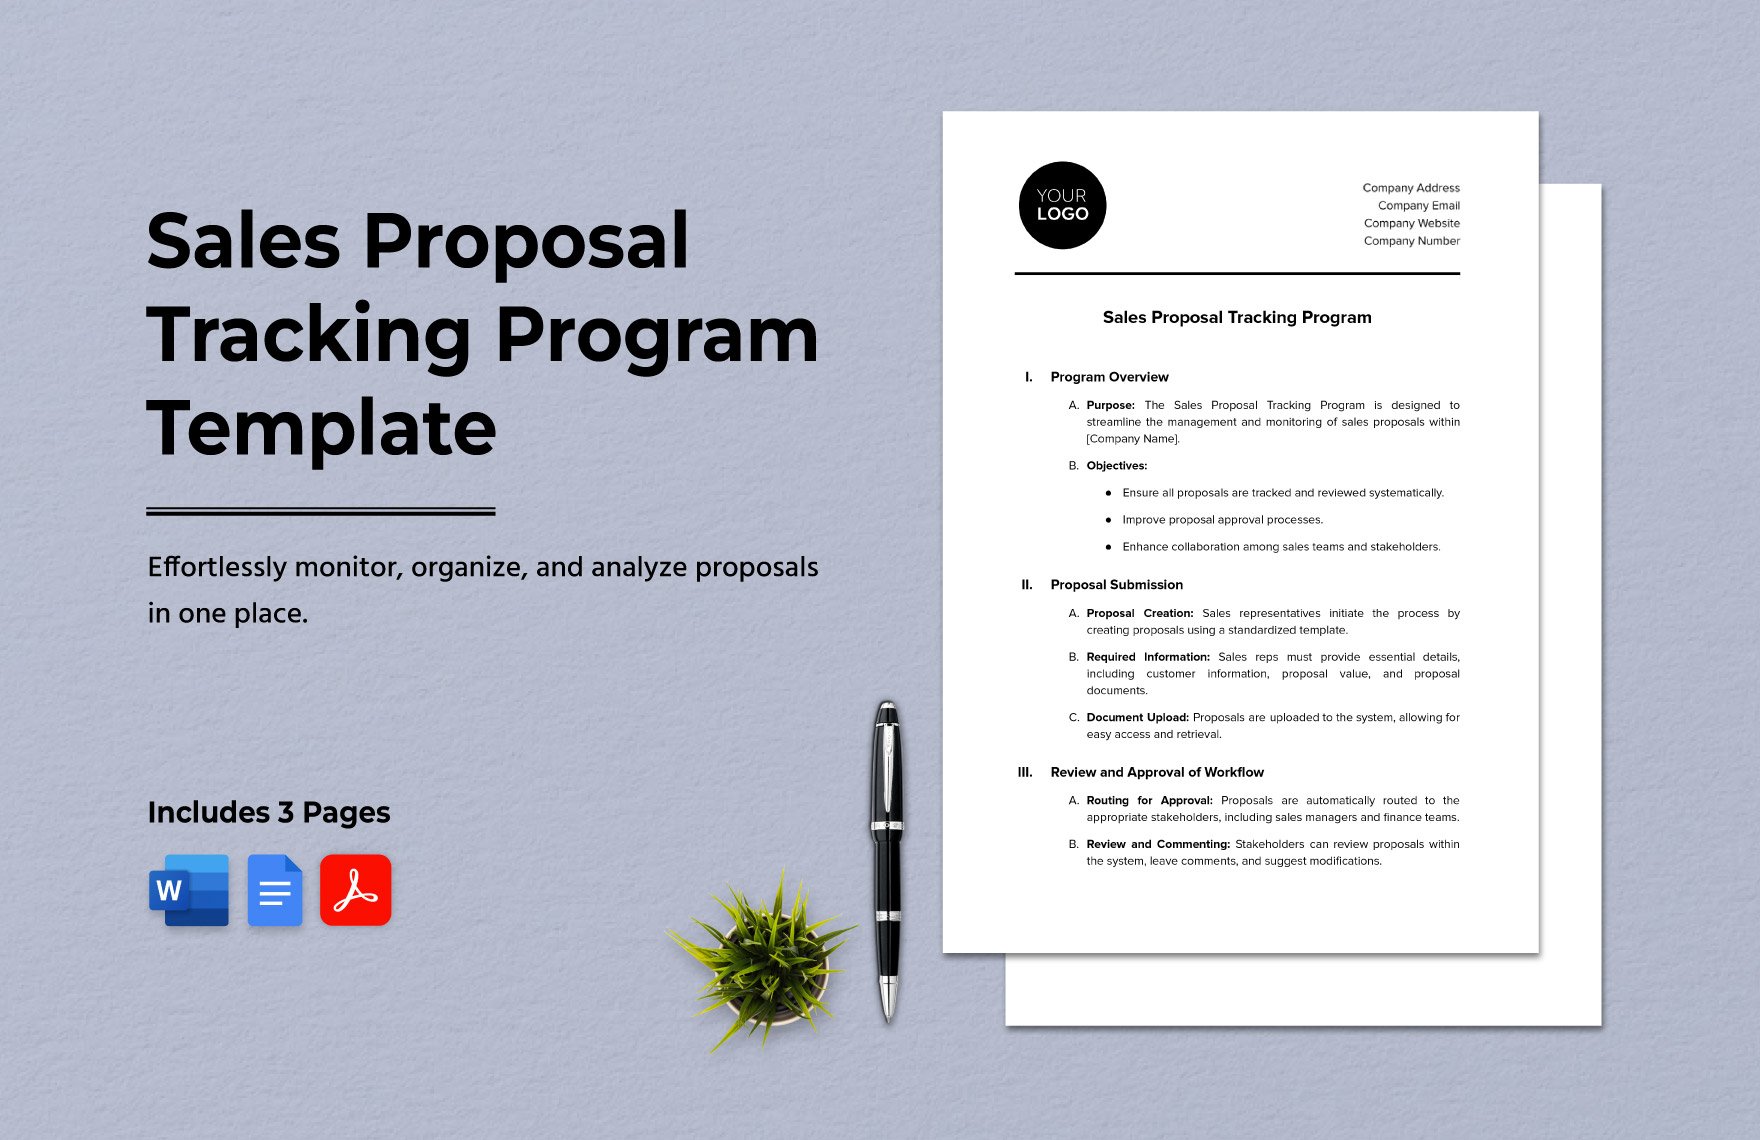 Sales Proposal Tracking Program Template in Word, Google Docs, PDF